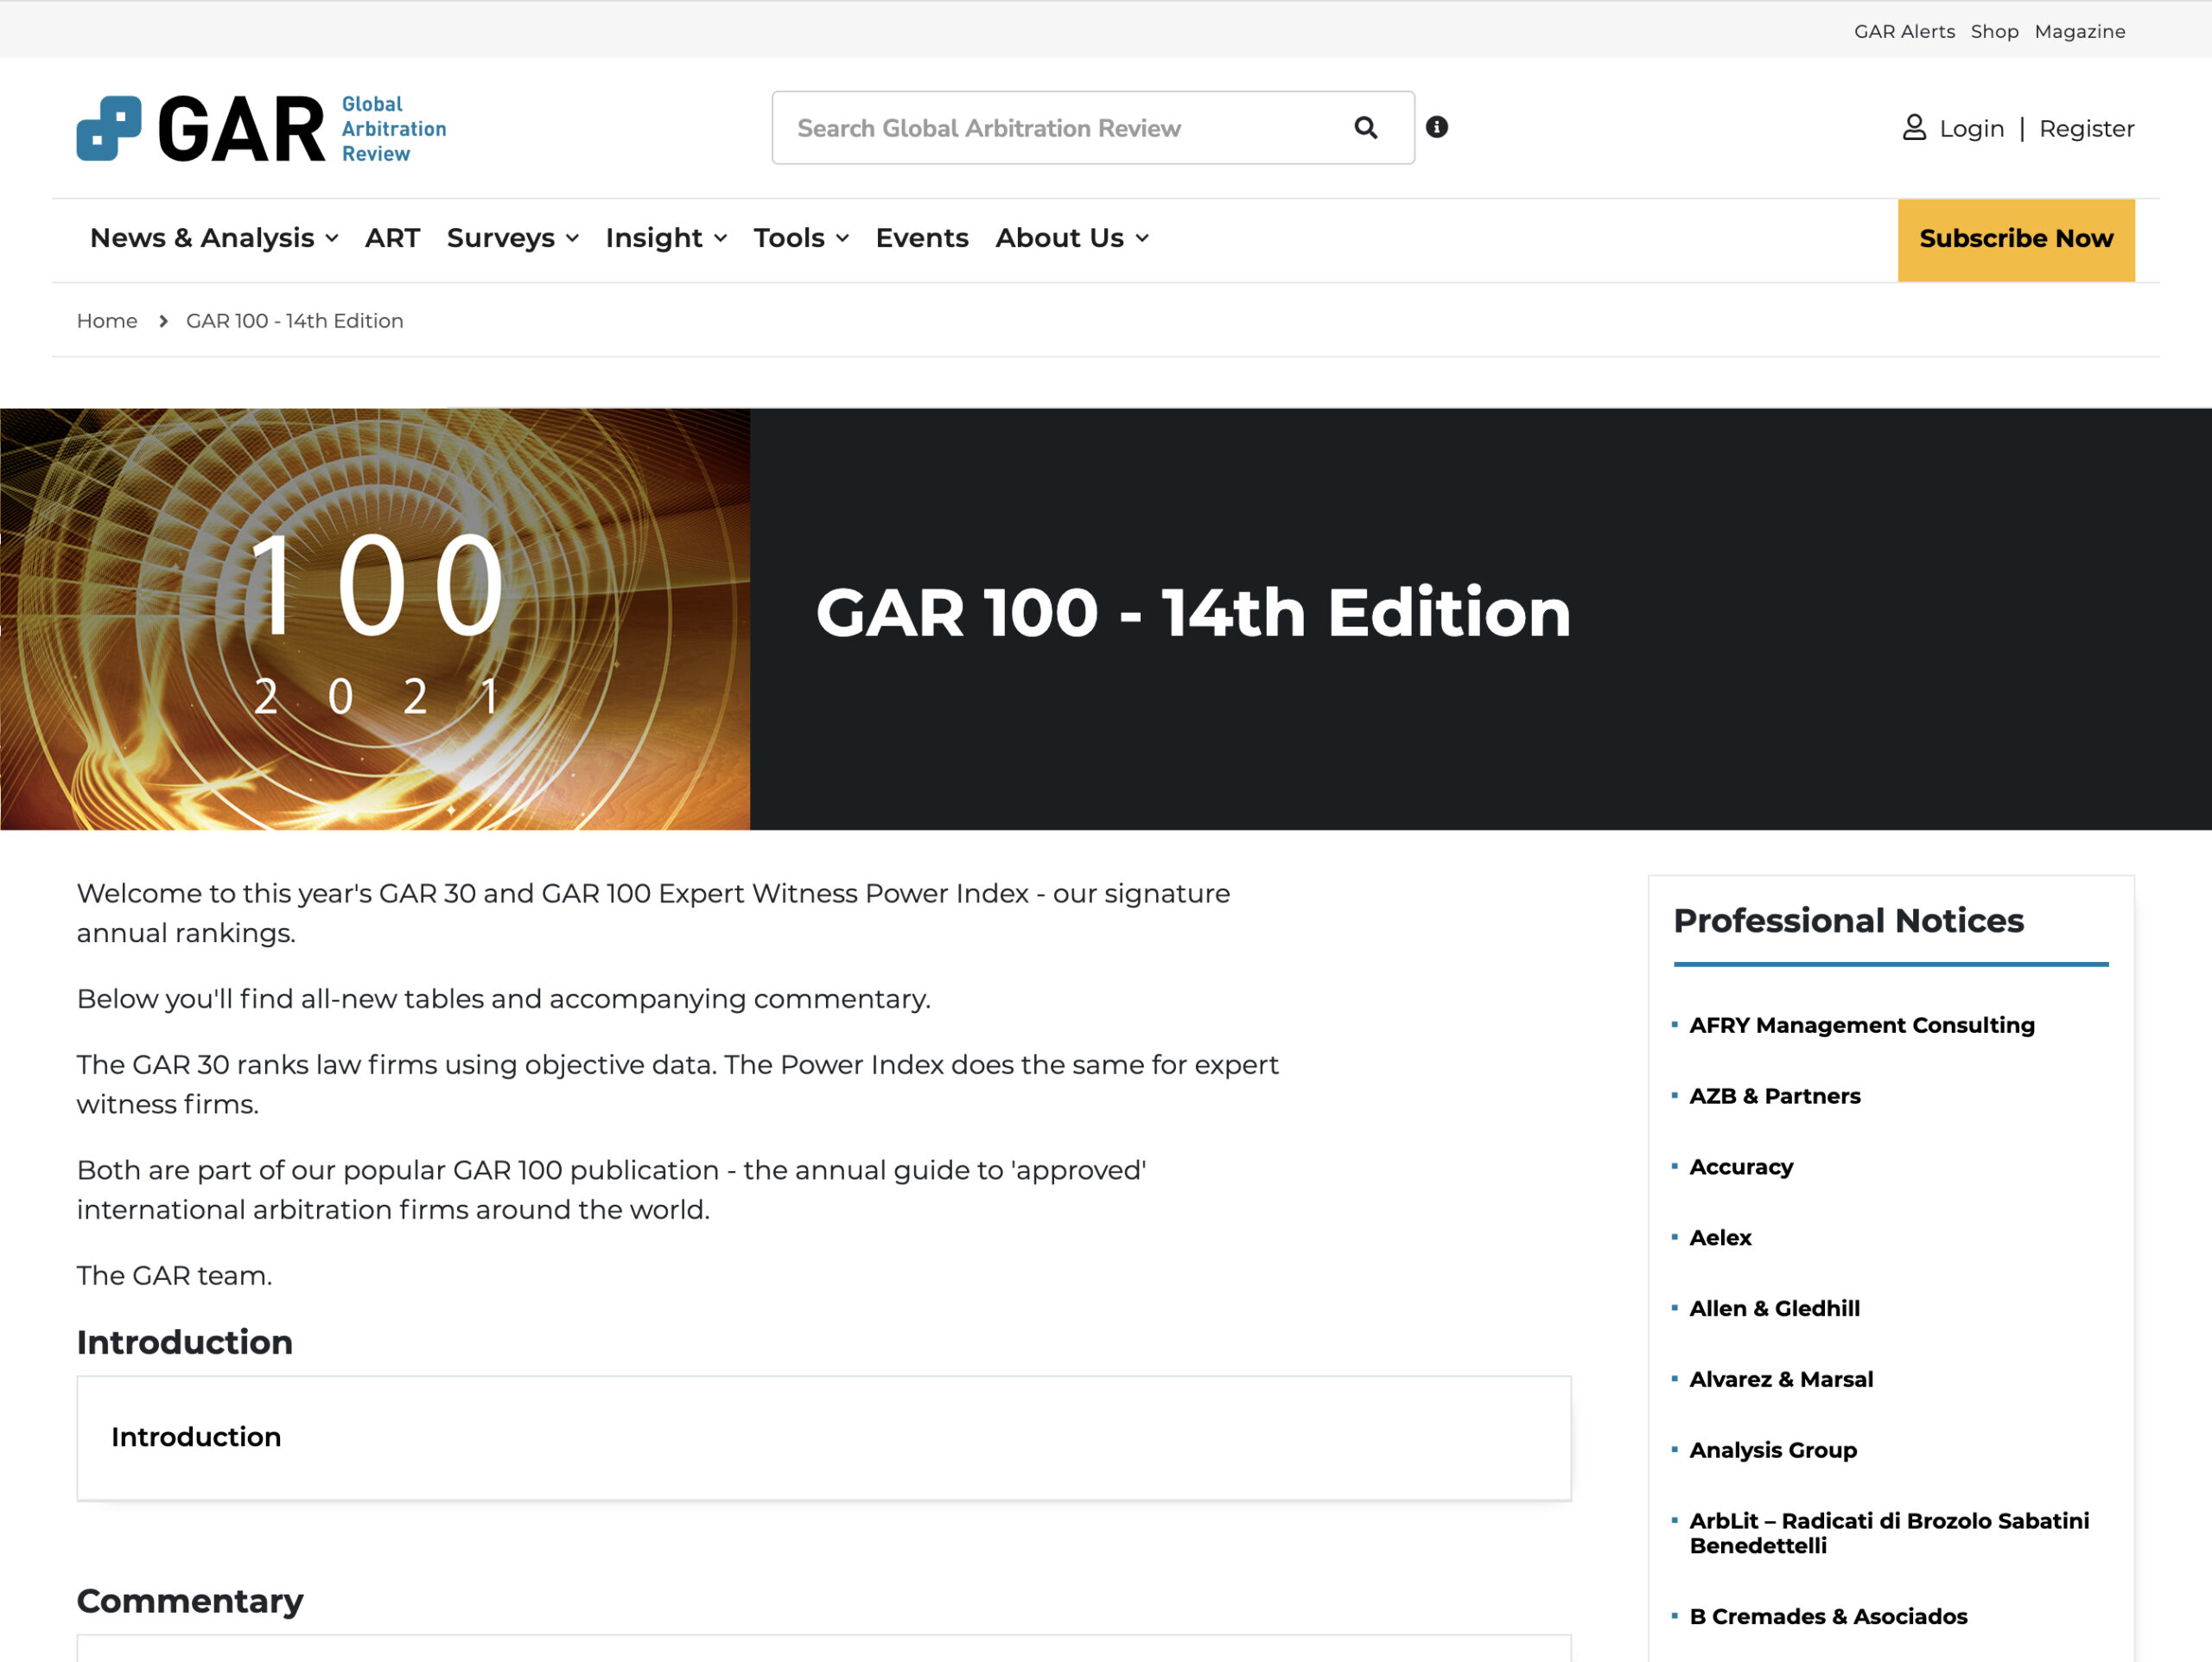 Interface showing the GAR 100 listing